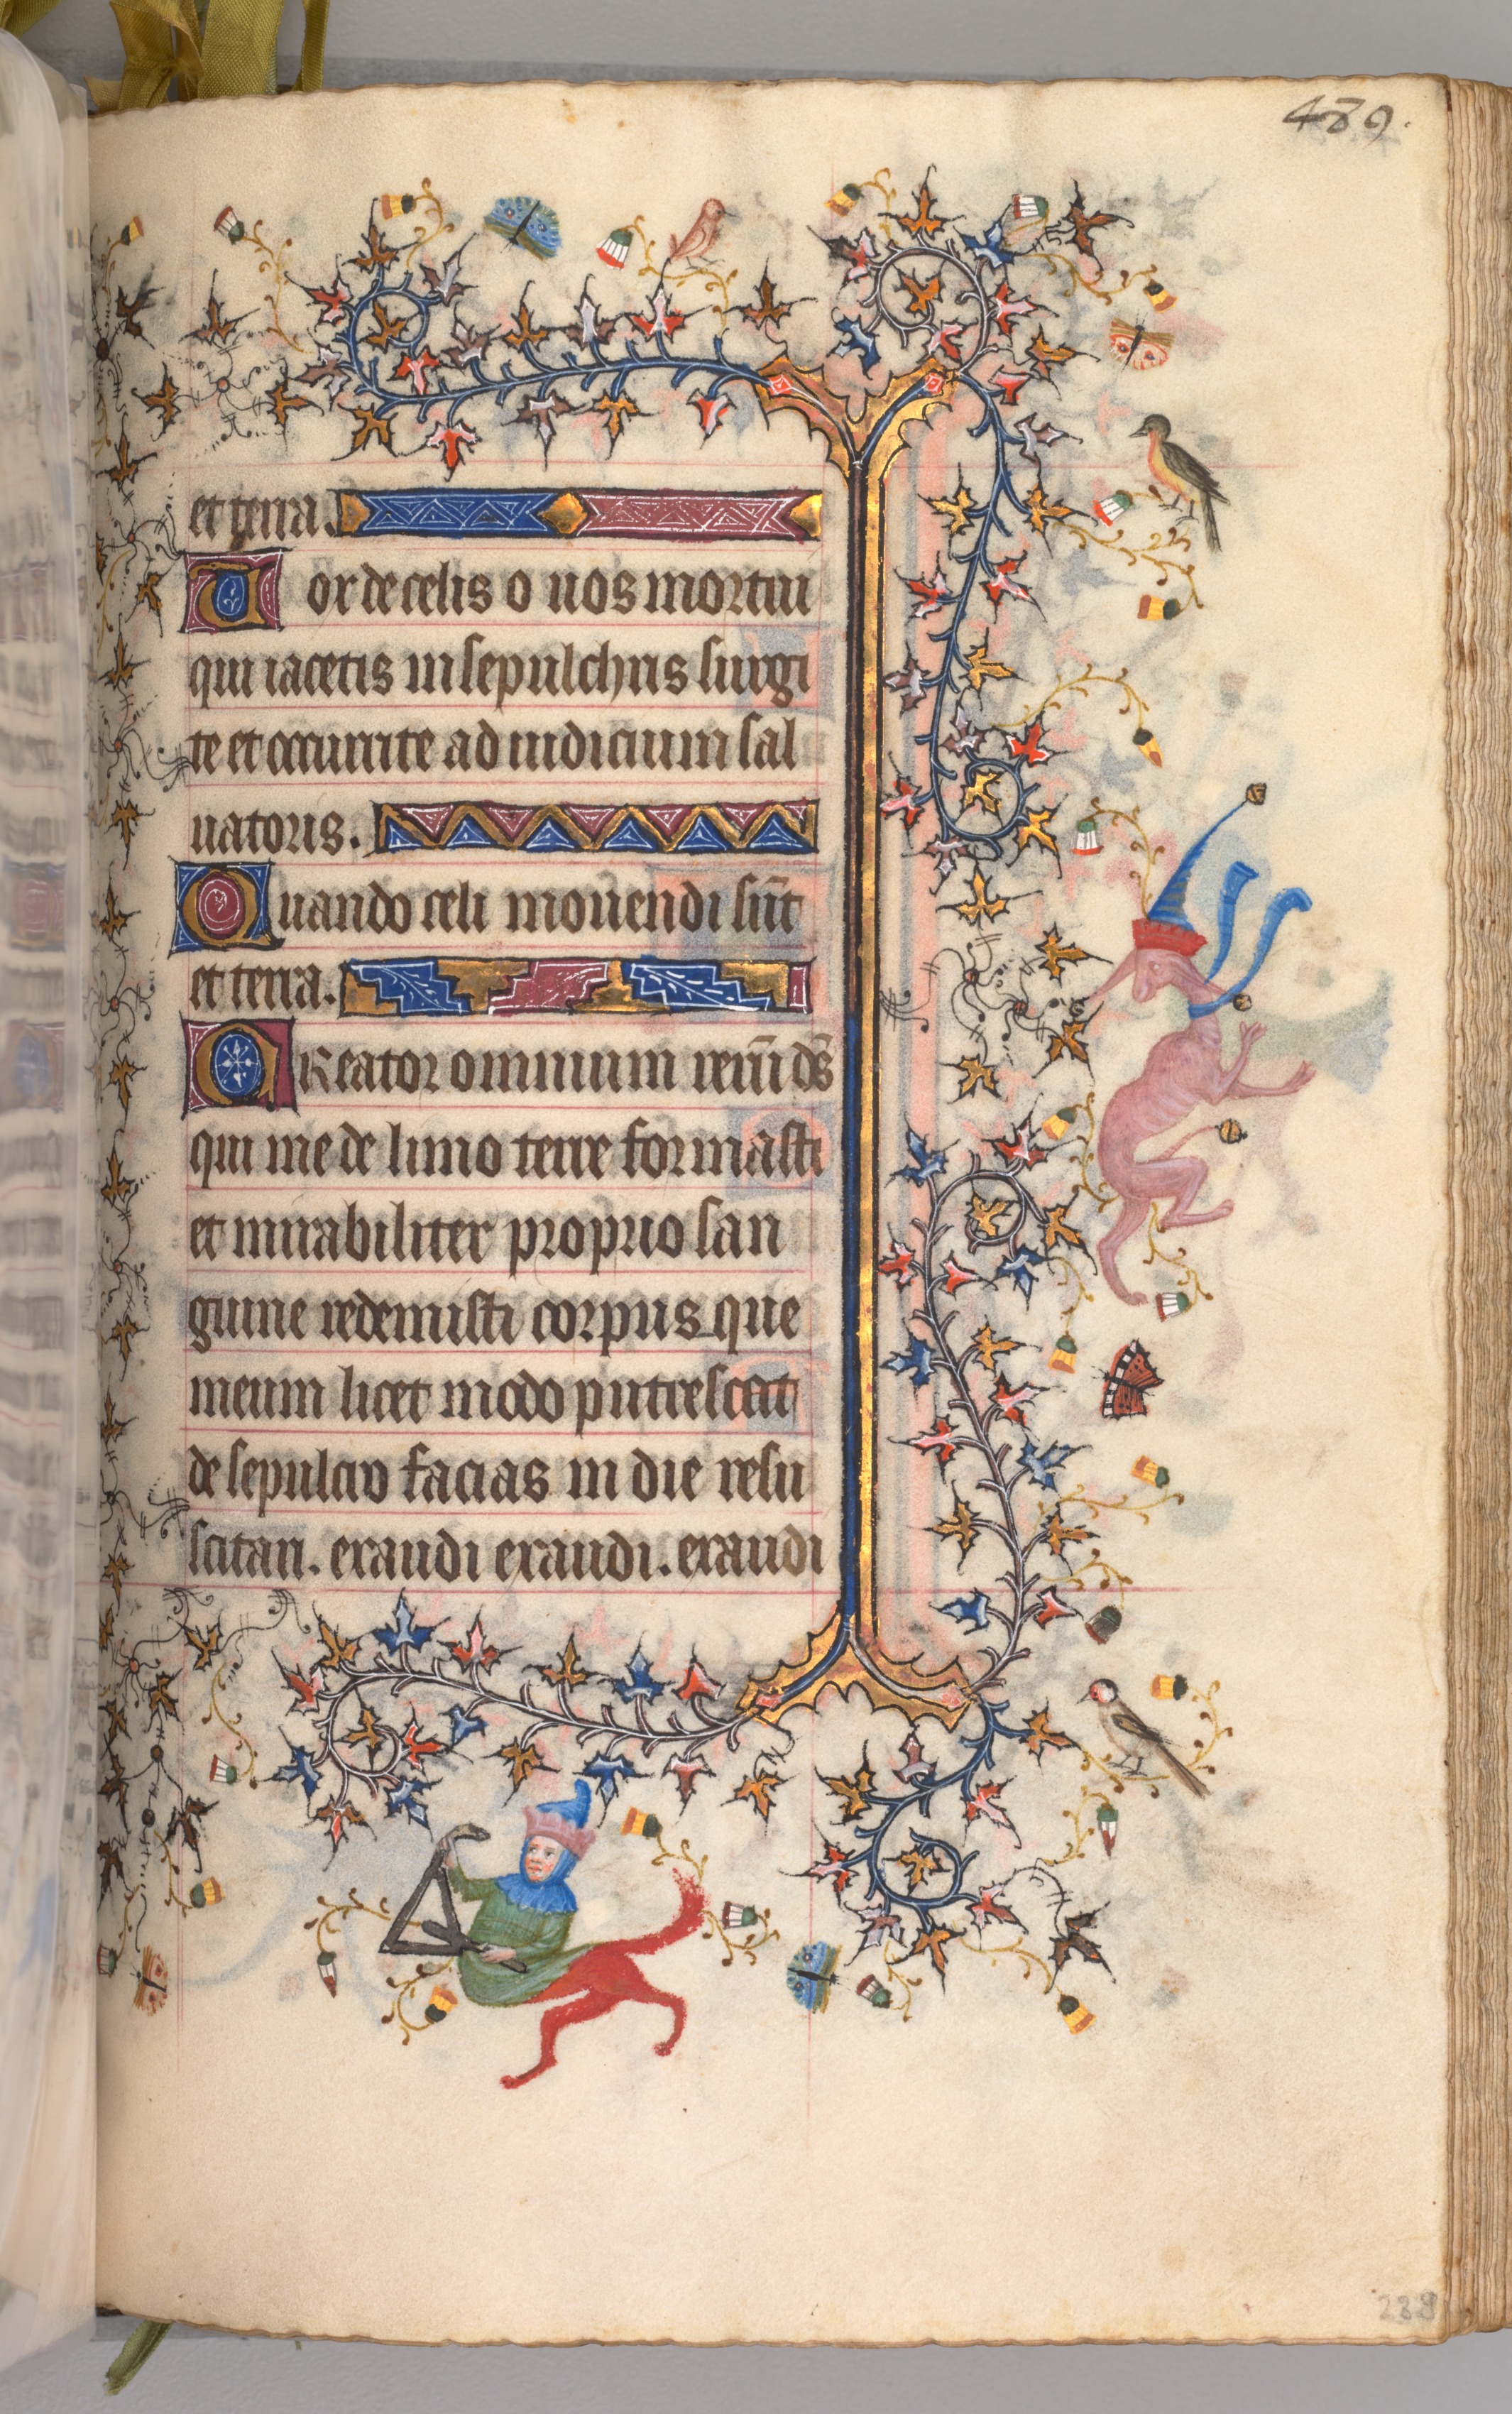 Hours of Charles the Noble, King of Navarre (1361-1425): fol. 239r, Text